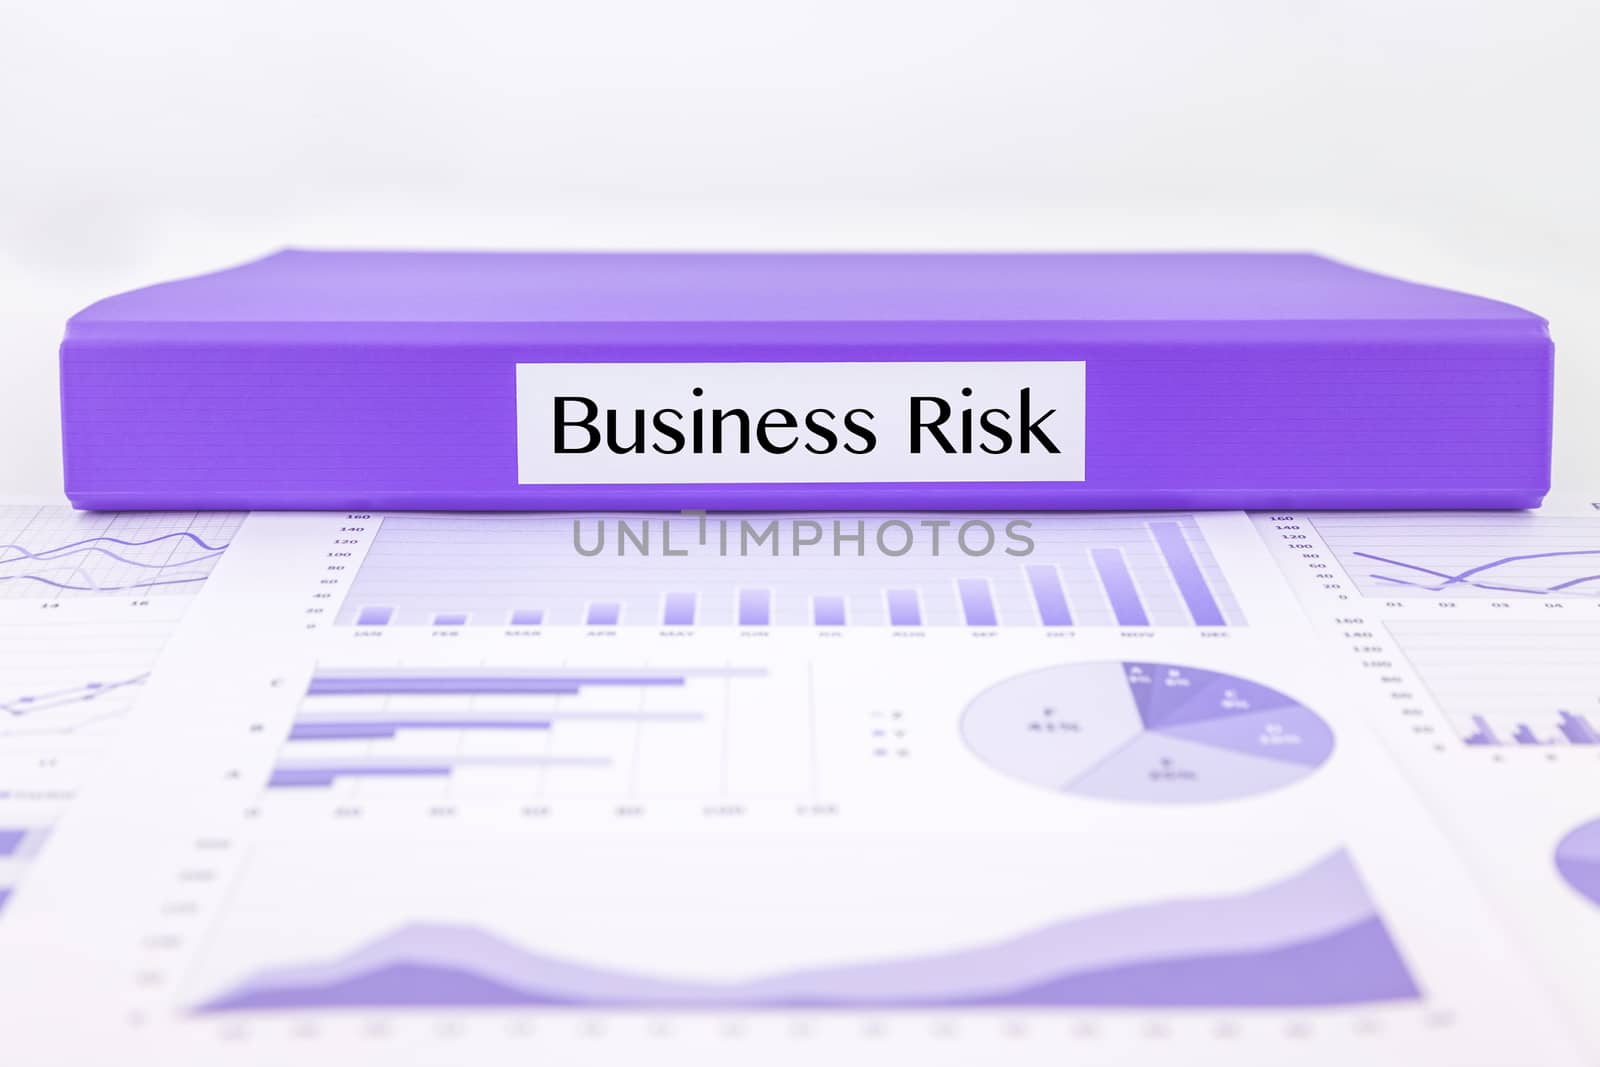 Business risk report with graph analysis by vinnstock